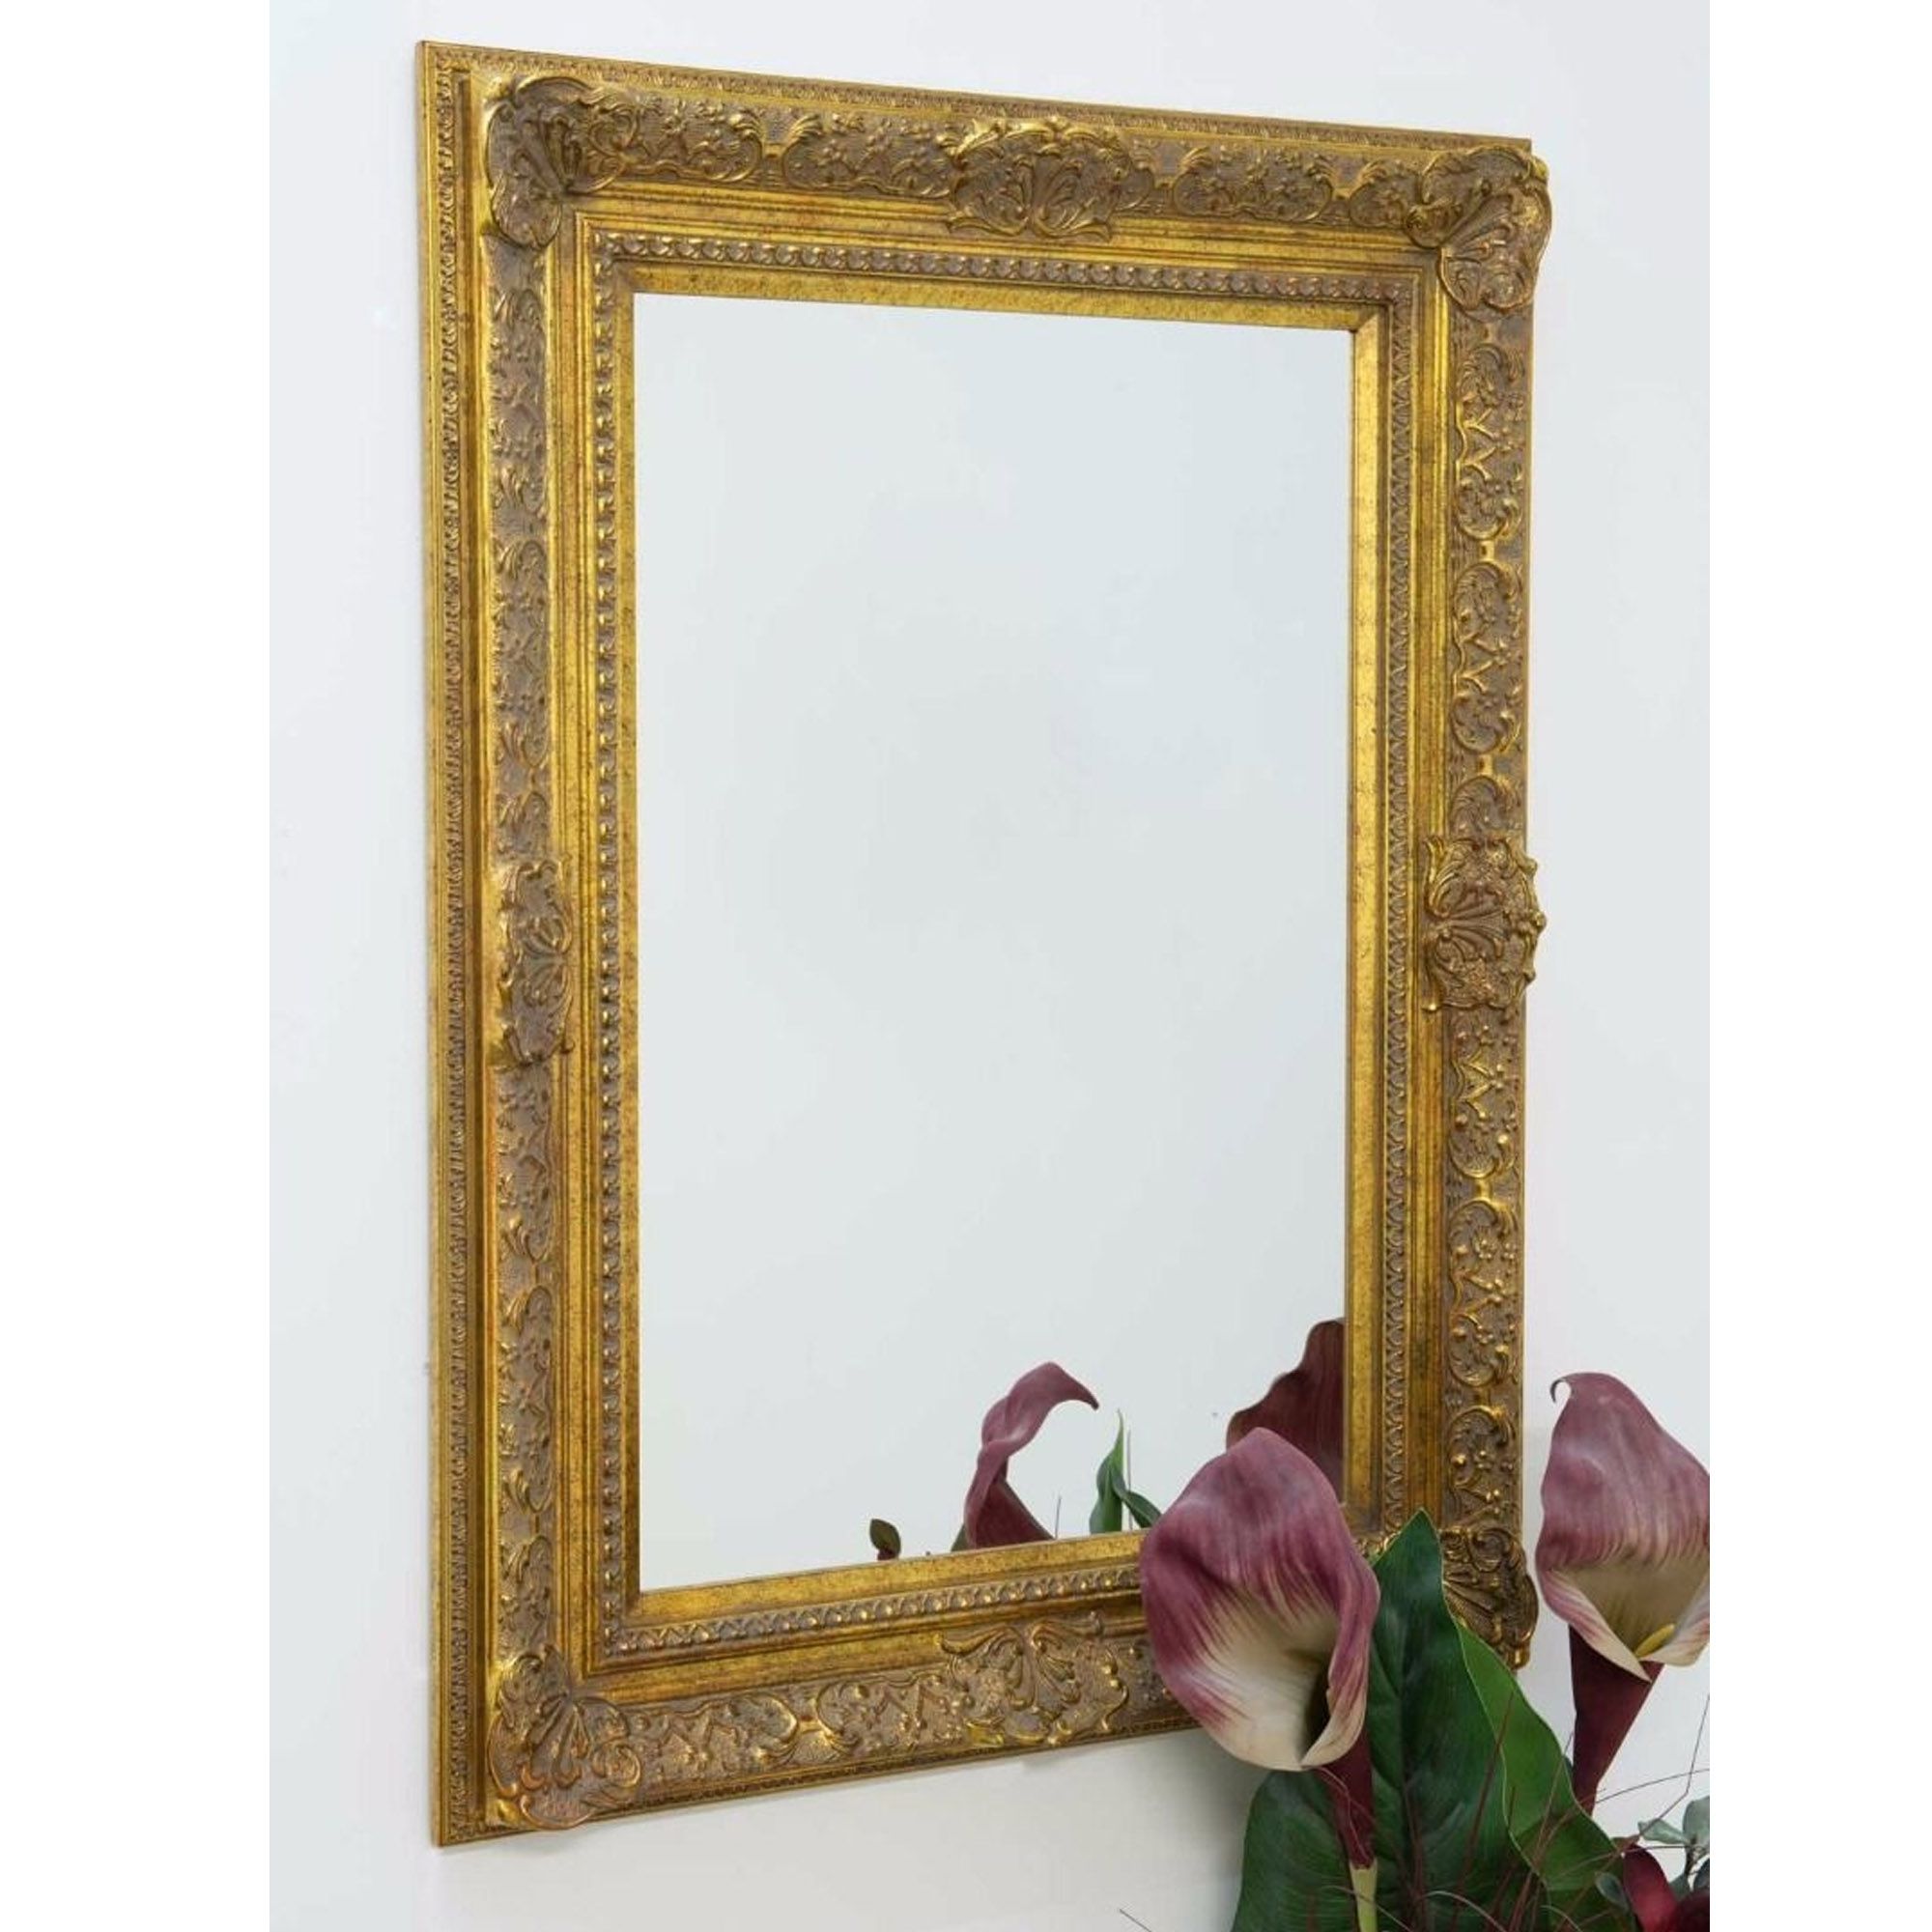 Gold Decorative Wall Mirrors Within Best And Newest Large Decorative Ornate Gold Antique French Style Wall Mirror – French (View 7 of 15)